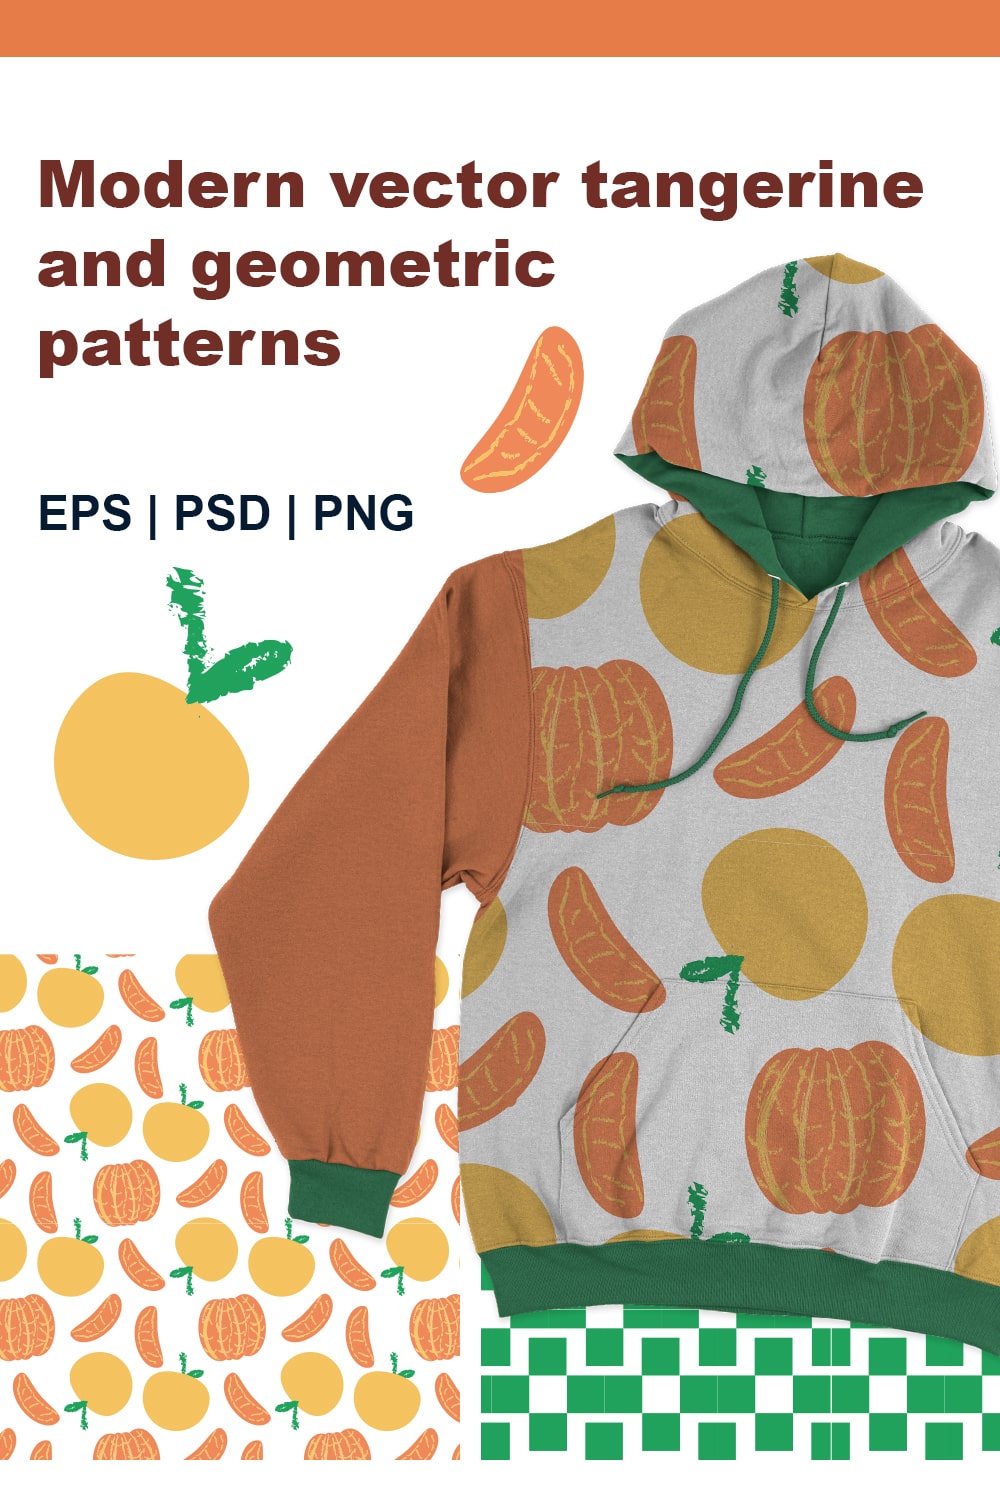 All eyes on your product with this design! Exclusive and modern tangerine and geometric patterns design for your successful projects! pinterest preview image.